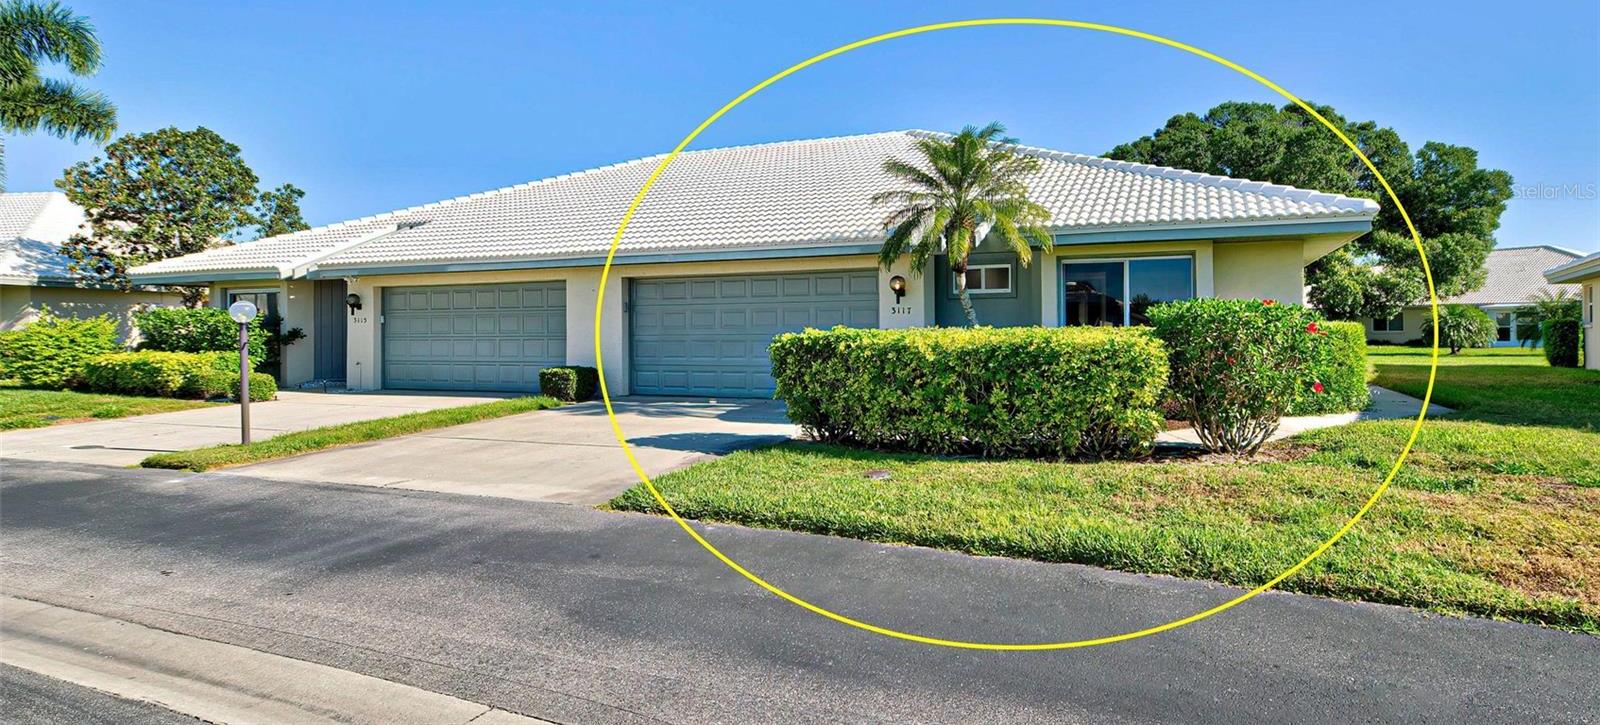 Photo one of 3117 Heron Shores Dr Venice FL 34293 | MLS N6131588